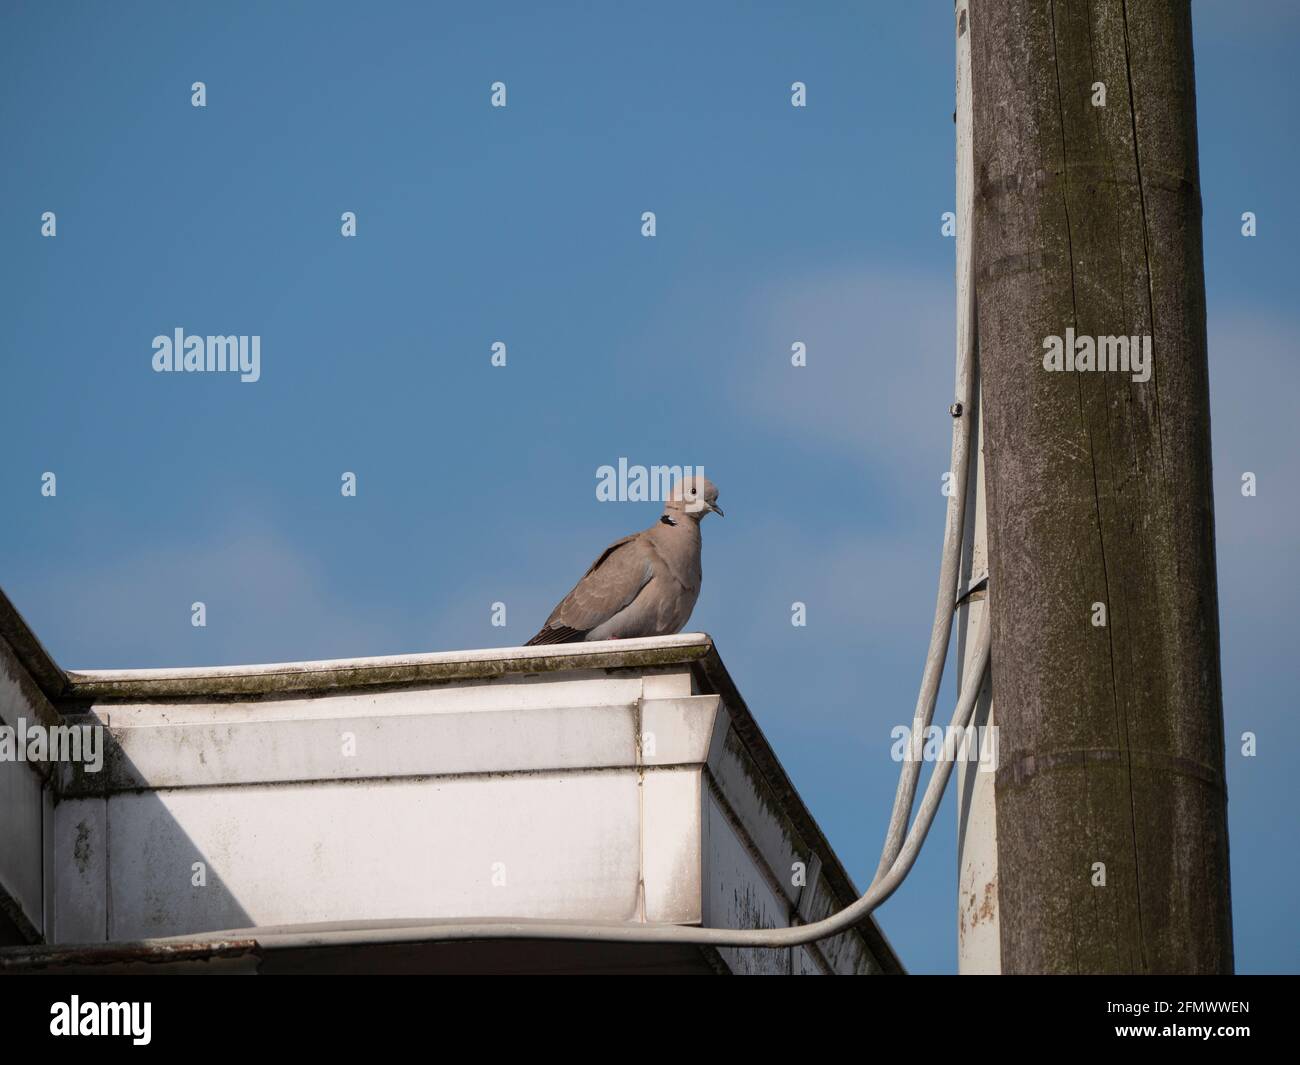 Turtledove sits on a white gutter next to a utility pole and power lines Stock Photo